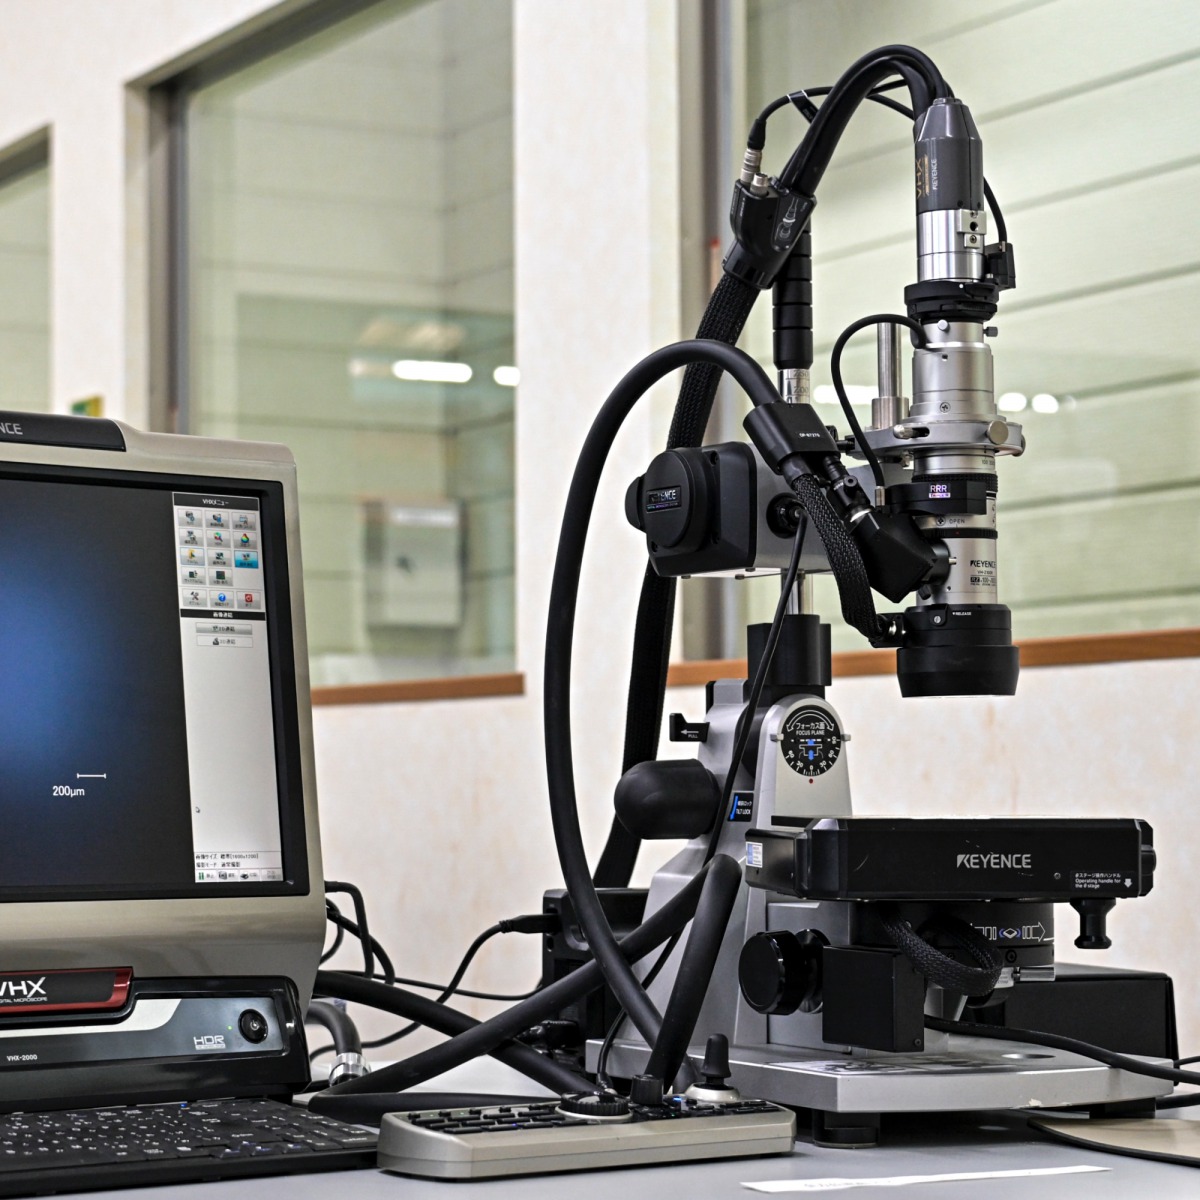 Microscope with omni-directional motorized stage